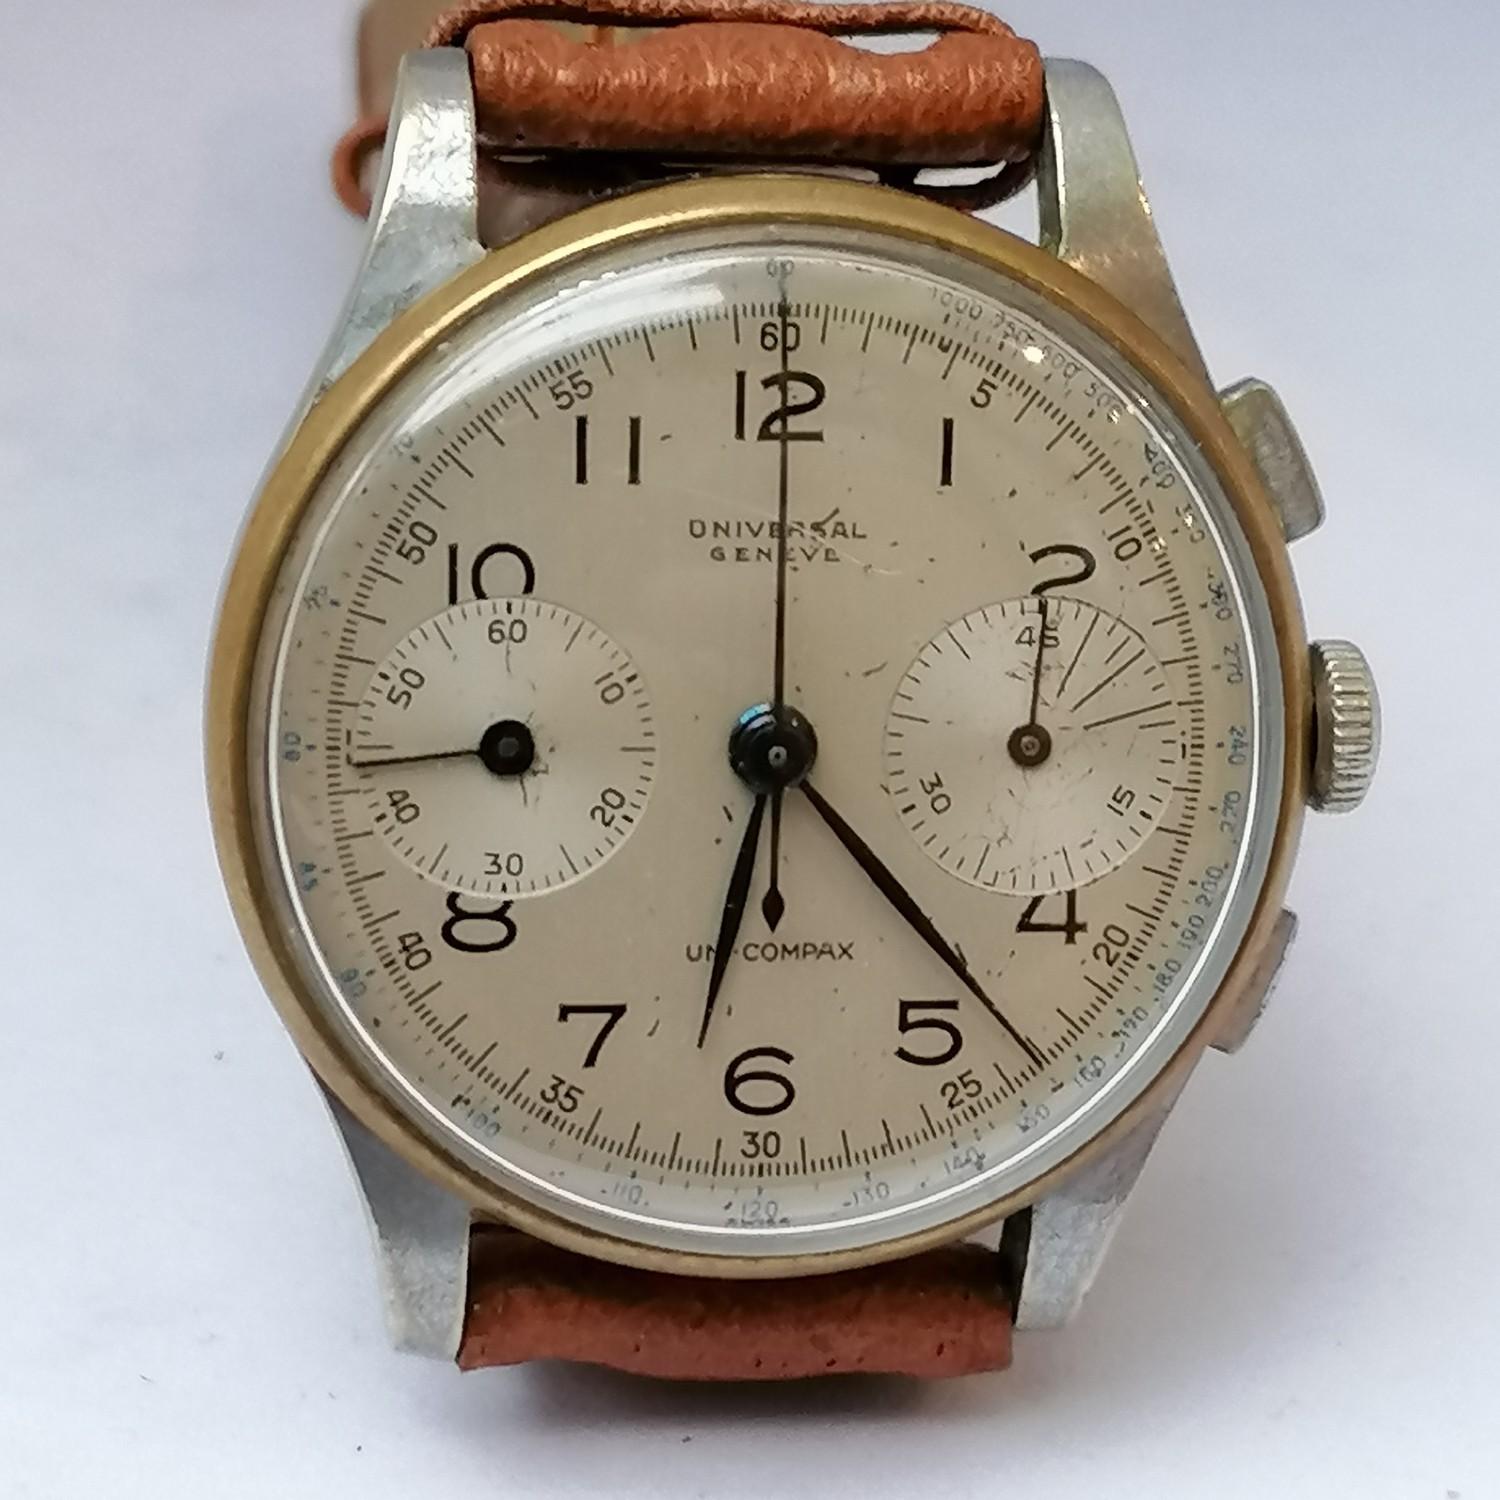 Universal geneve uni compax chronograph wristwatch 285 numbered movement - running & chronograph